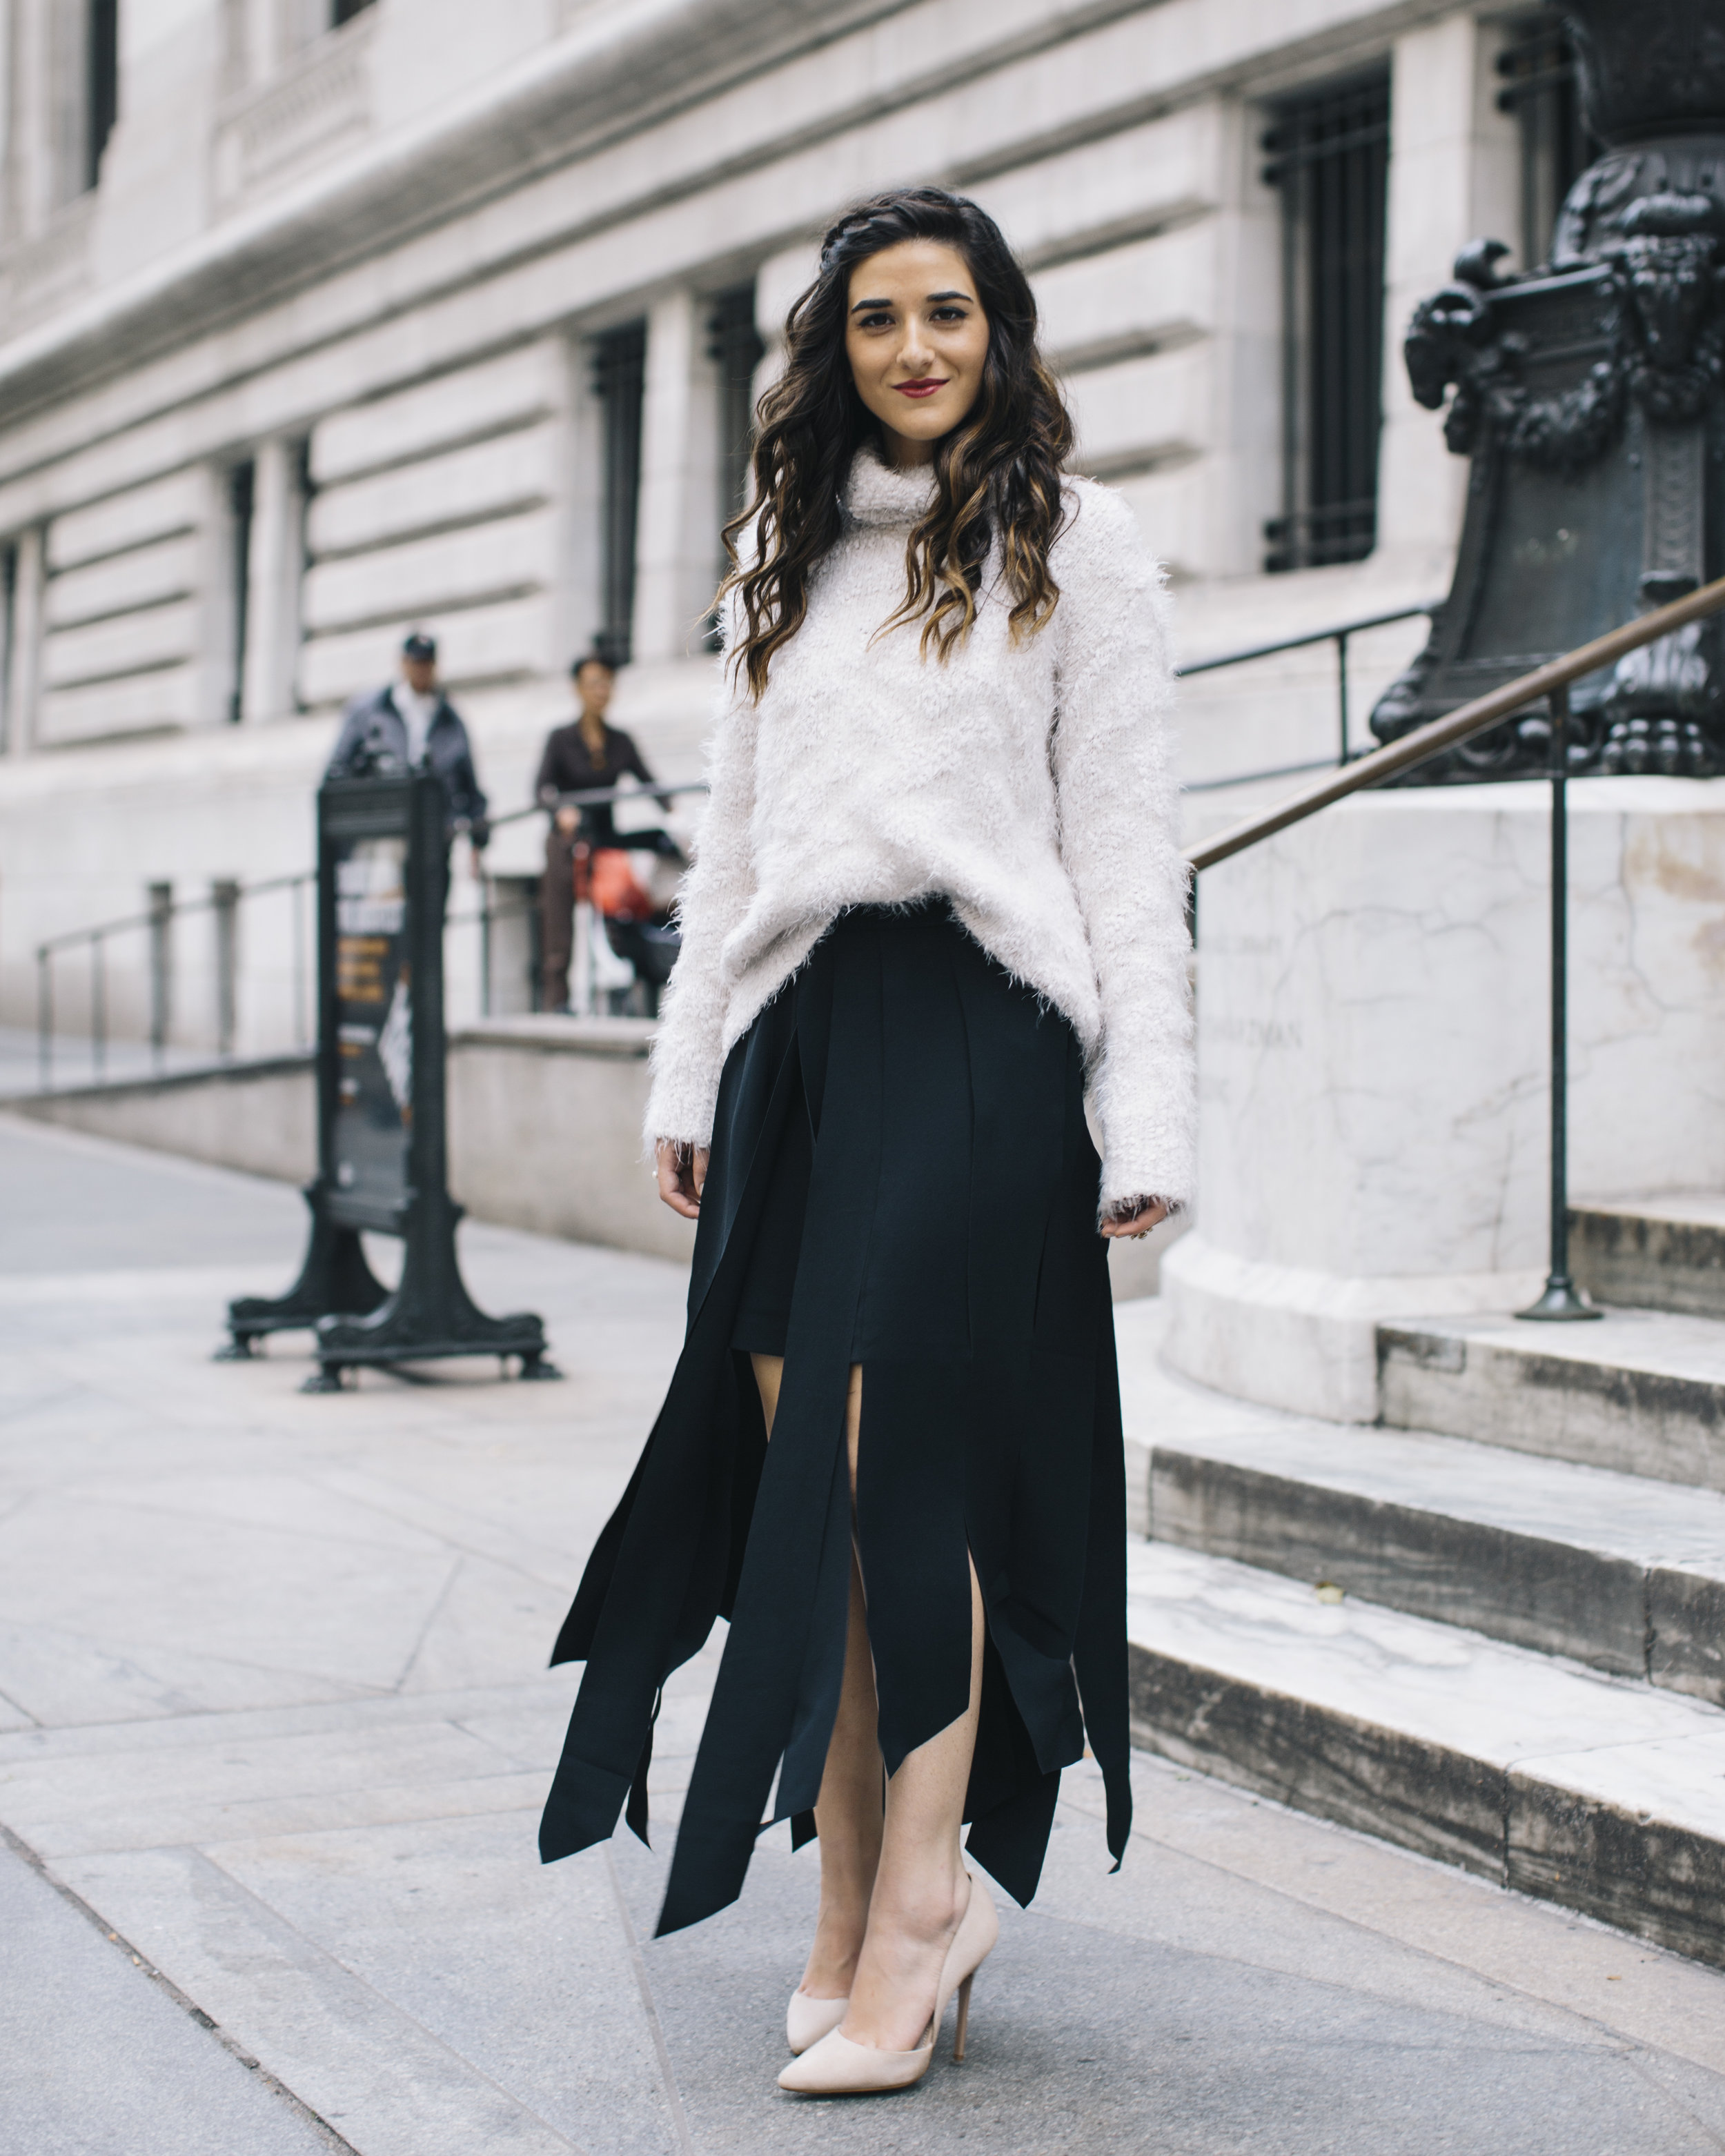 Shopping with Octer Fringe Skirt Louboutins & Love Fashion Blog Esther Santer NYC Street Style Blogger Outfit OOTD Buy Trendy Sweater Cozy Zara Steve Madden Nude Heels Neutral Colors Navy White Winter New York City Photoshoot Beautiful Hair Women Girl.jpg